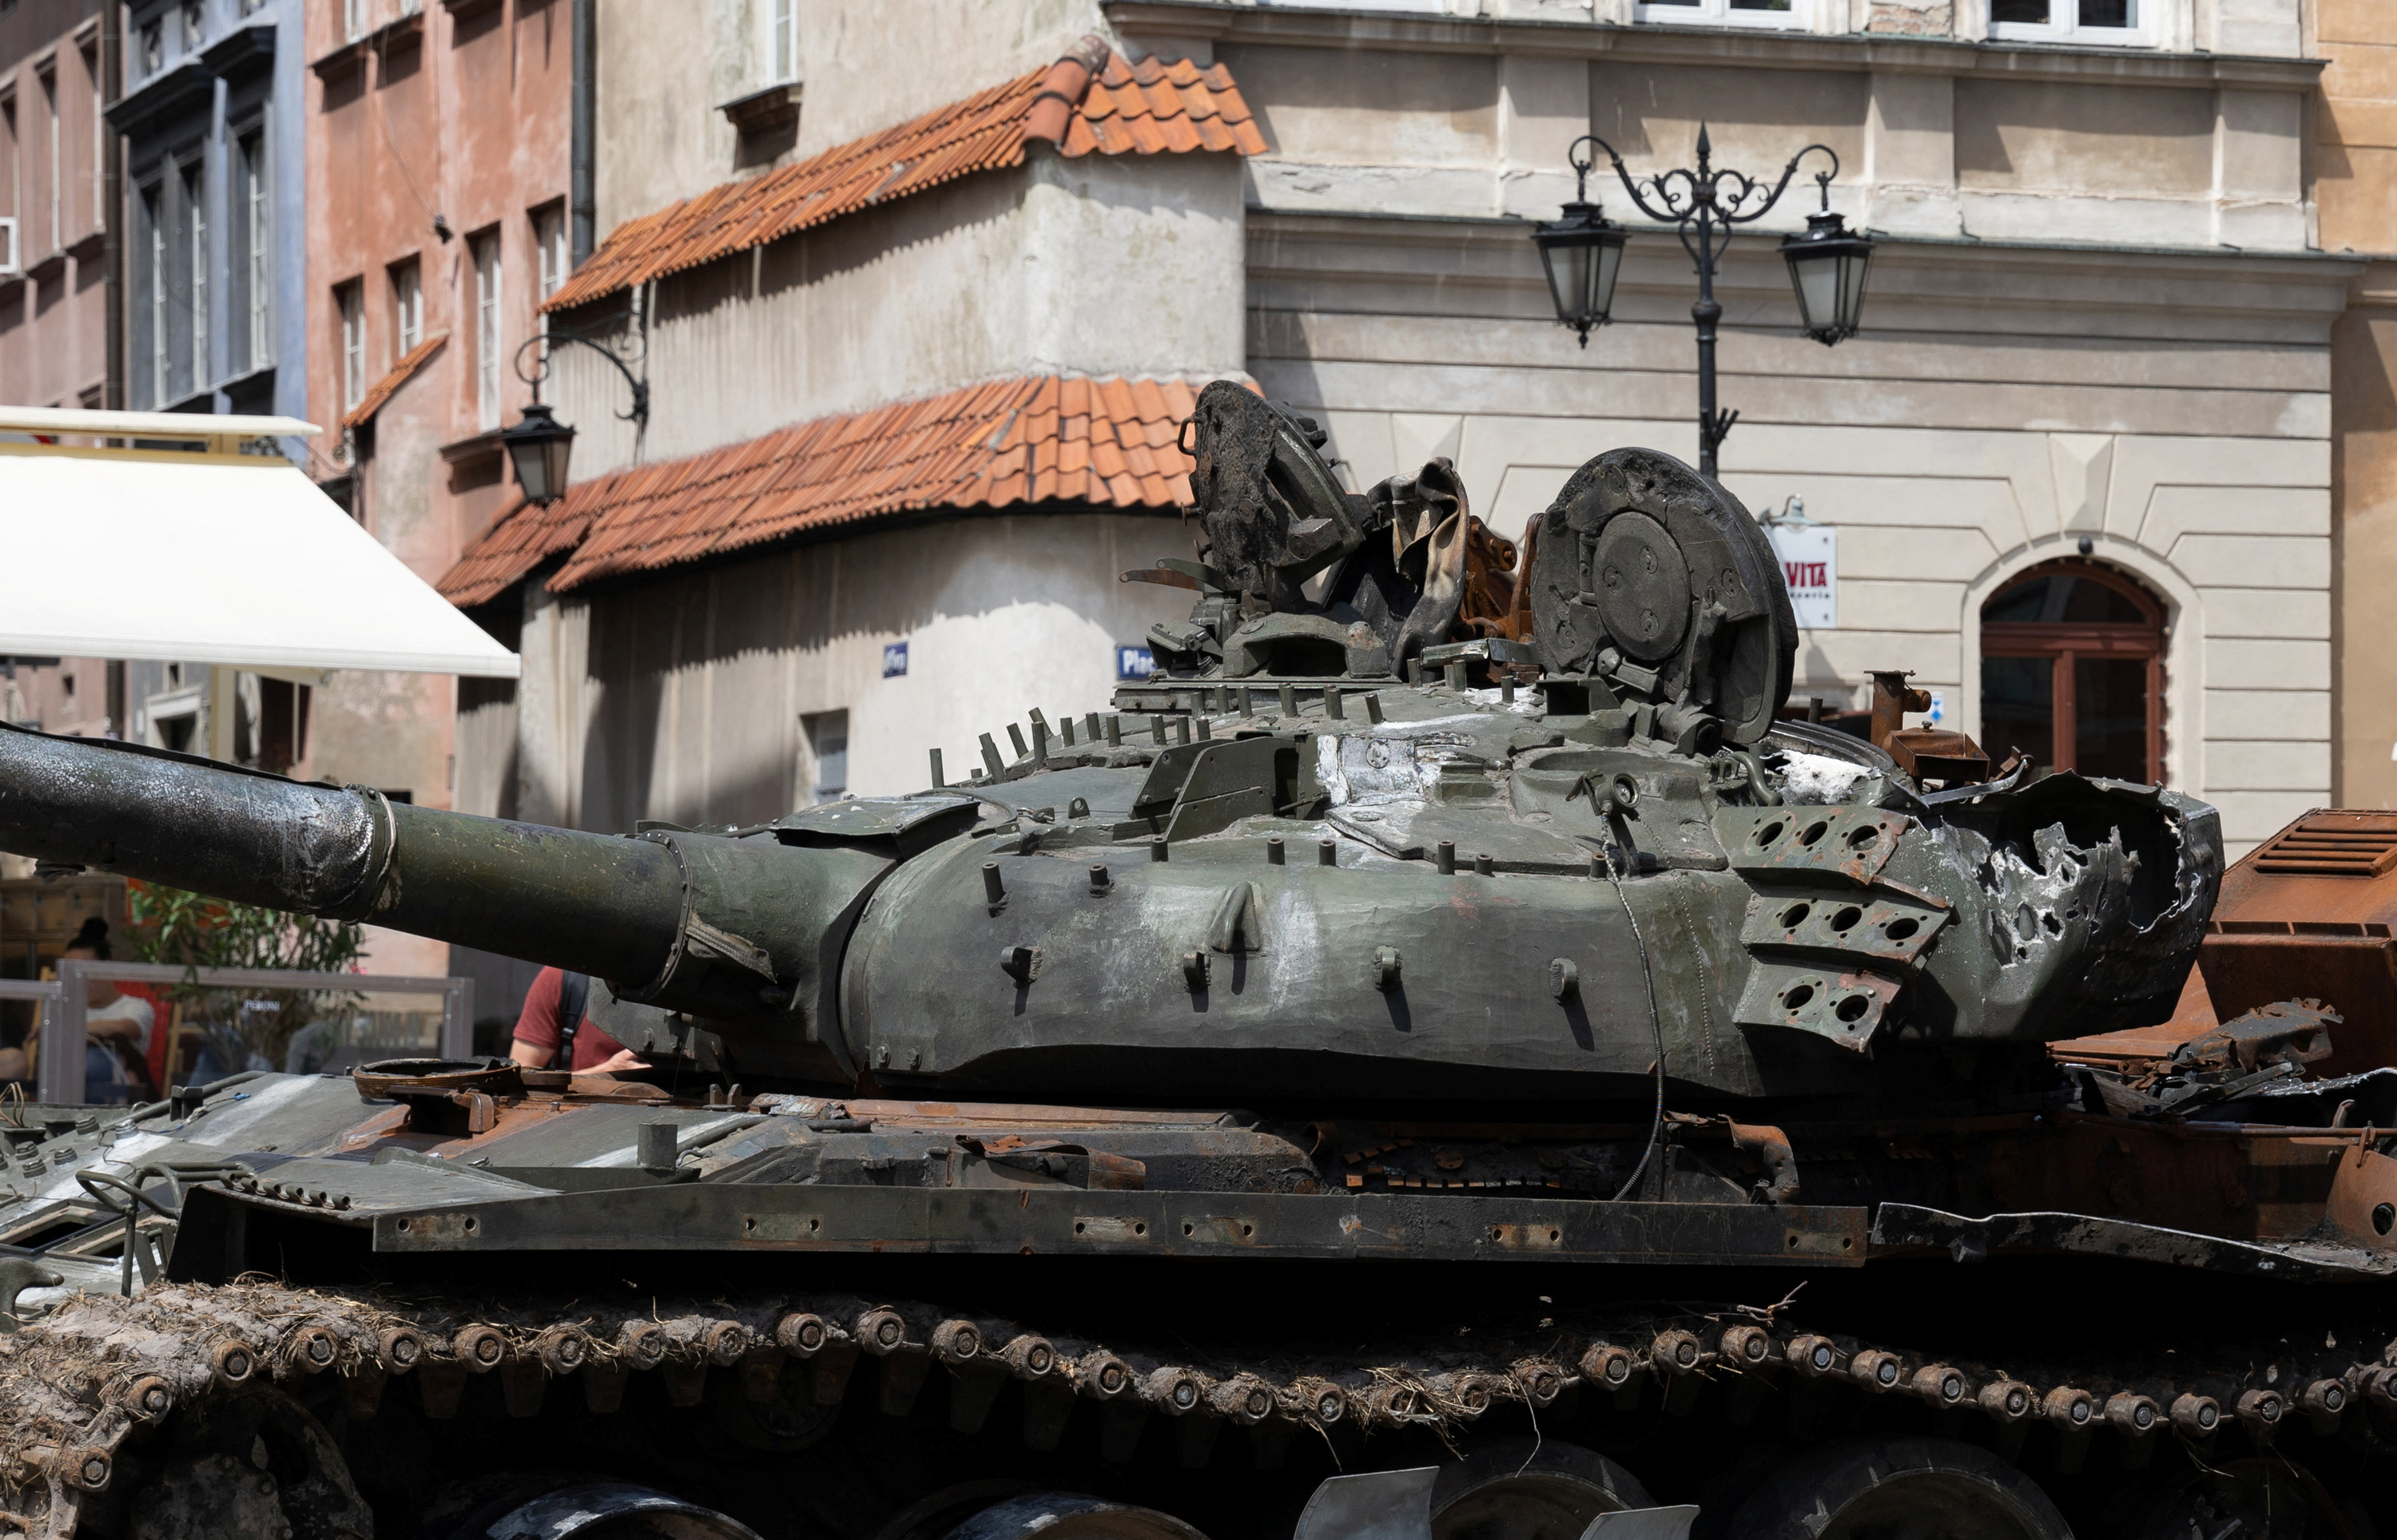 A destroyed Russian T-72B tank captured by the Ukrainian army is displayed during an exhibition called "For our freedom and yours" in the old town of Warsaw, Poland, June 27, 2022. REUTERS/Kacper Pempel